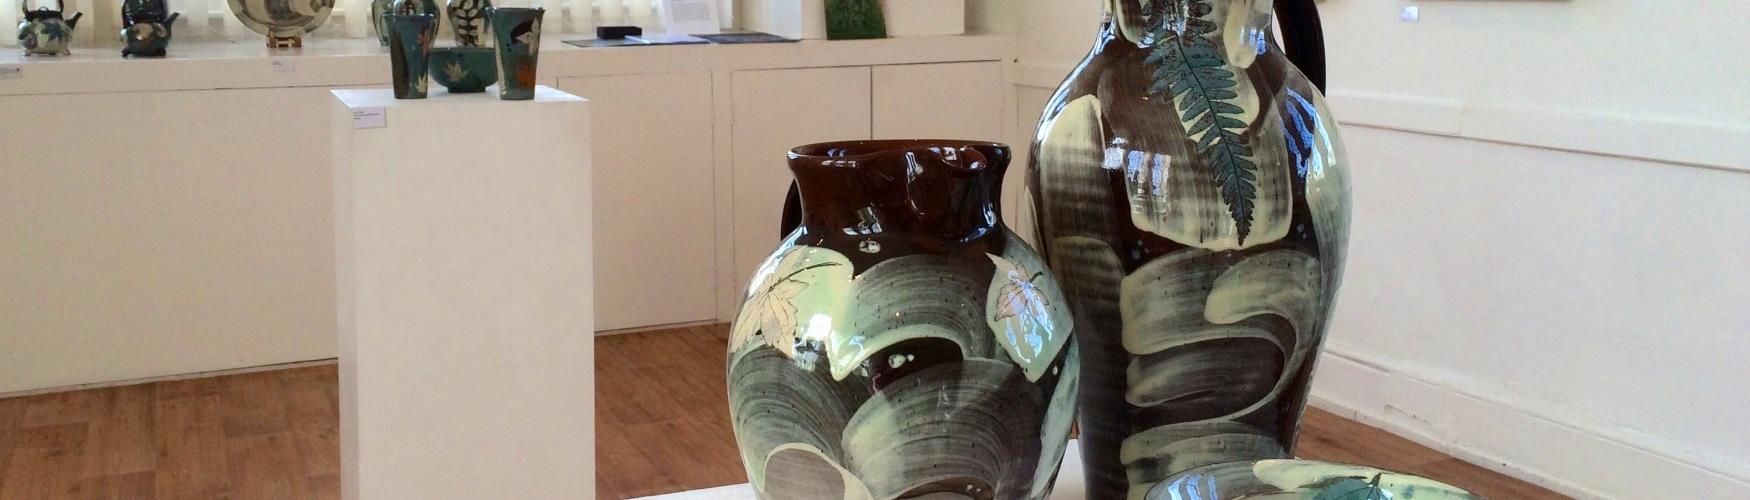 Pottery at West Ox Arts gallery in Bampton